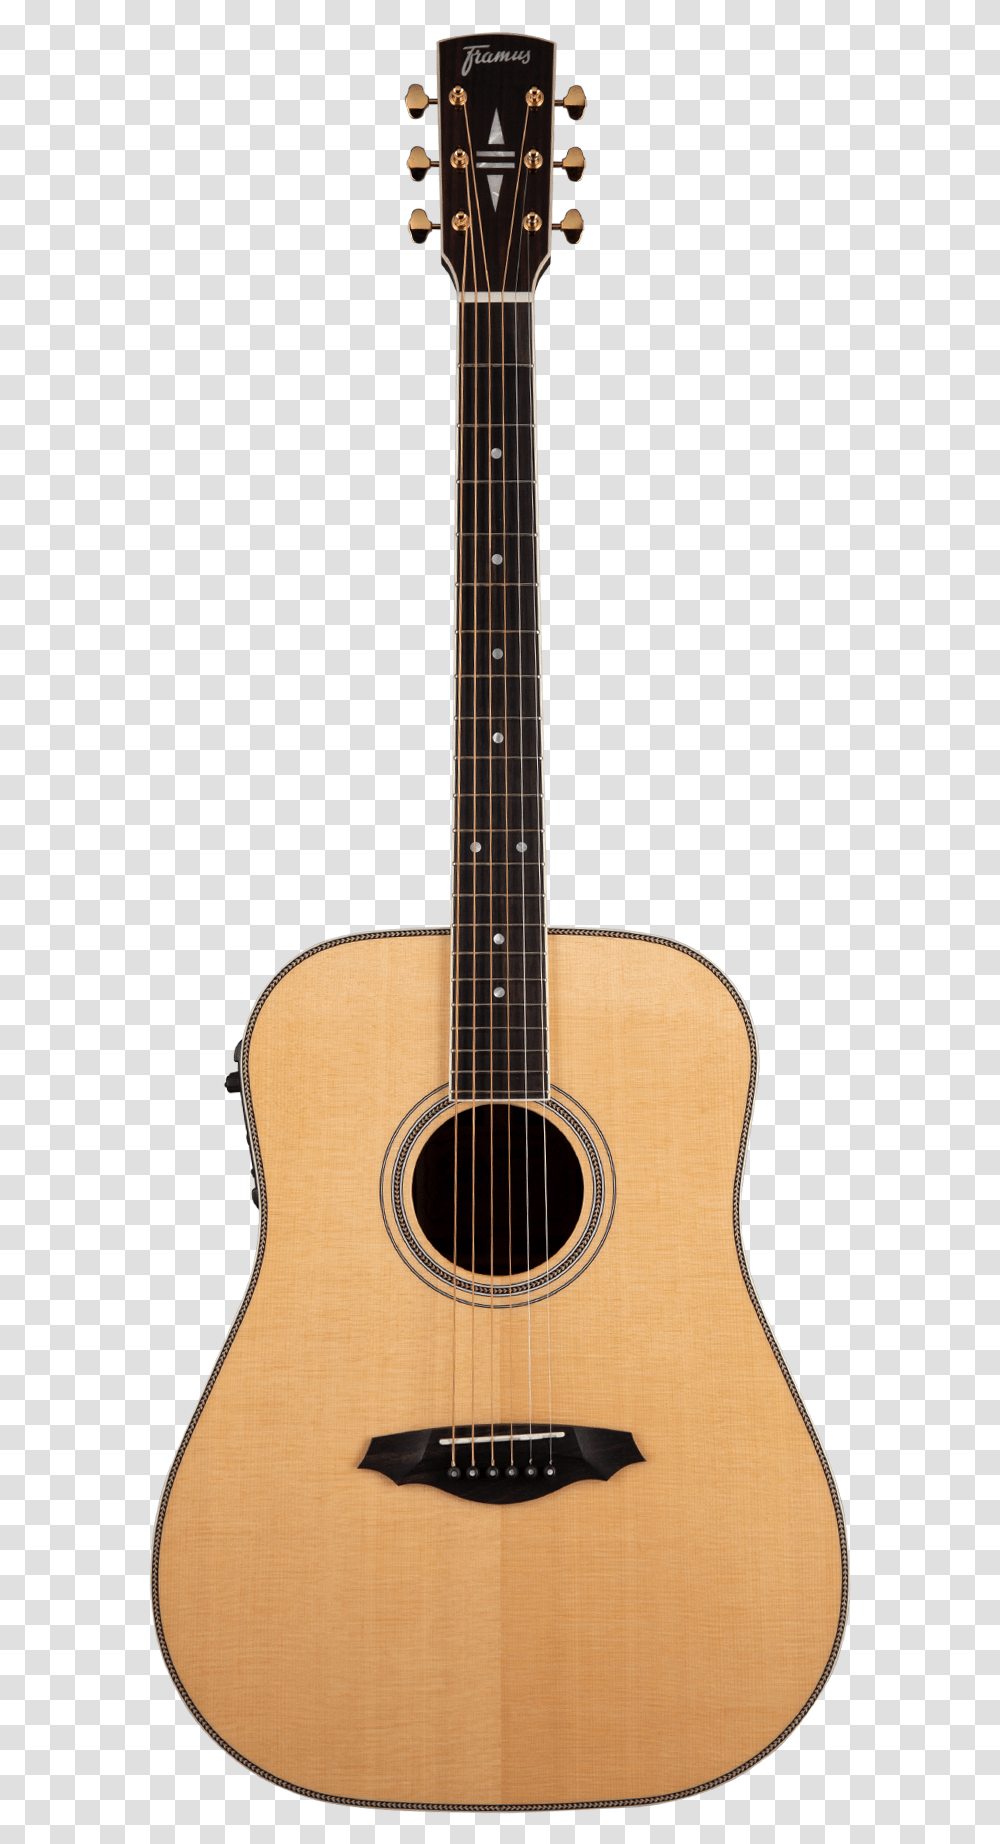 Fr Fd 28 N Sr Vnt E Swatch Stock Picture Of Guitar, Leisure Activities, Musical Instrument, Bass Guitar, Lute Transparent Png